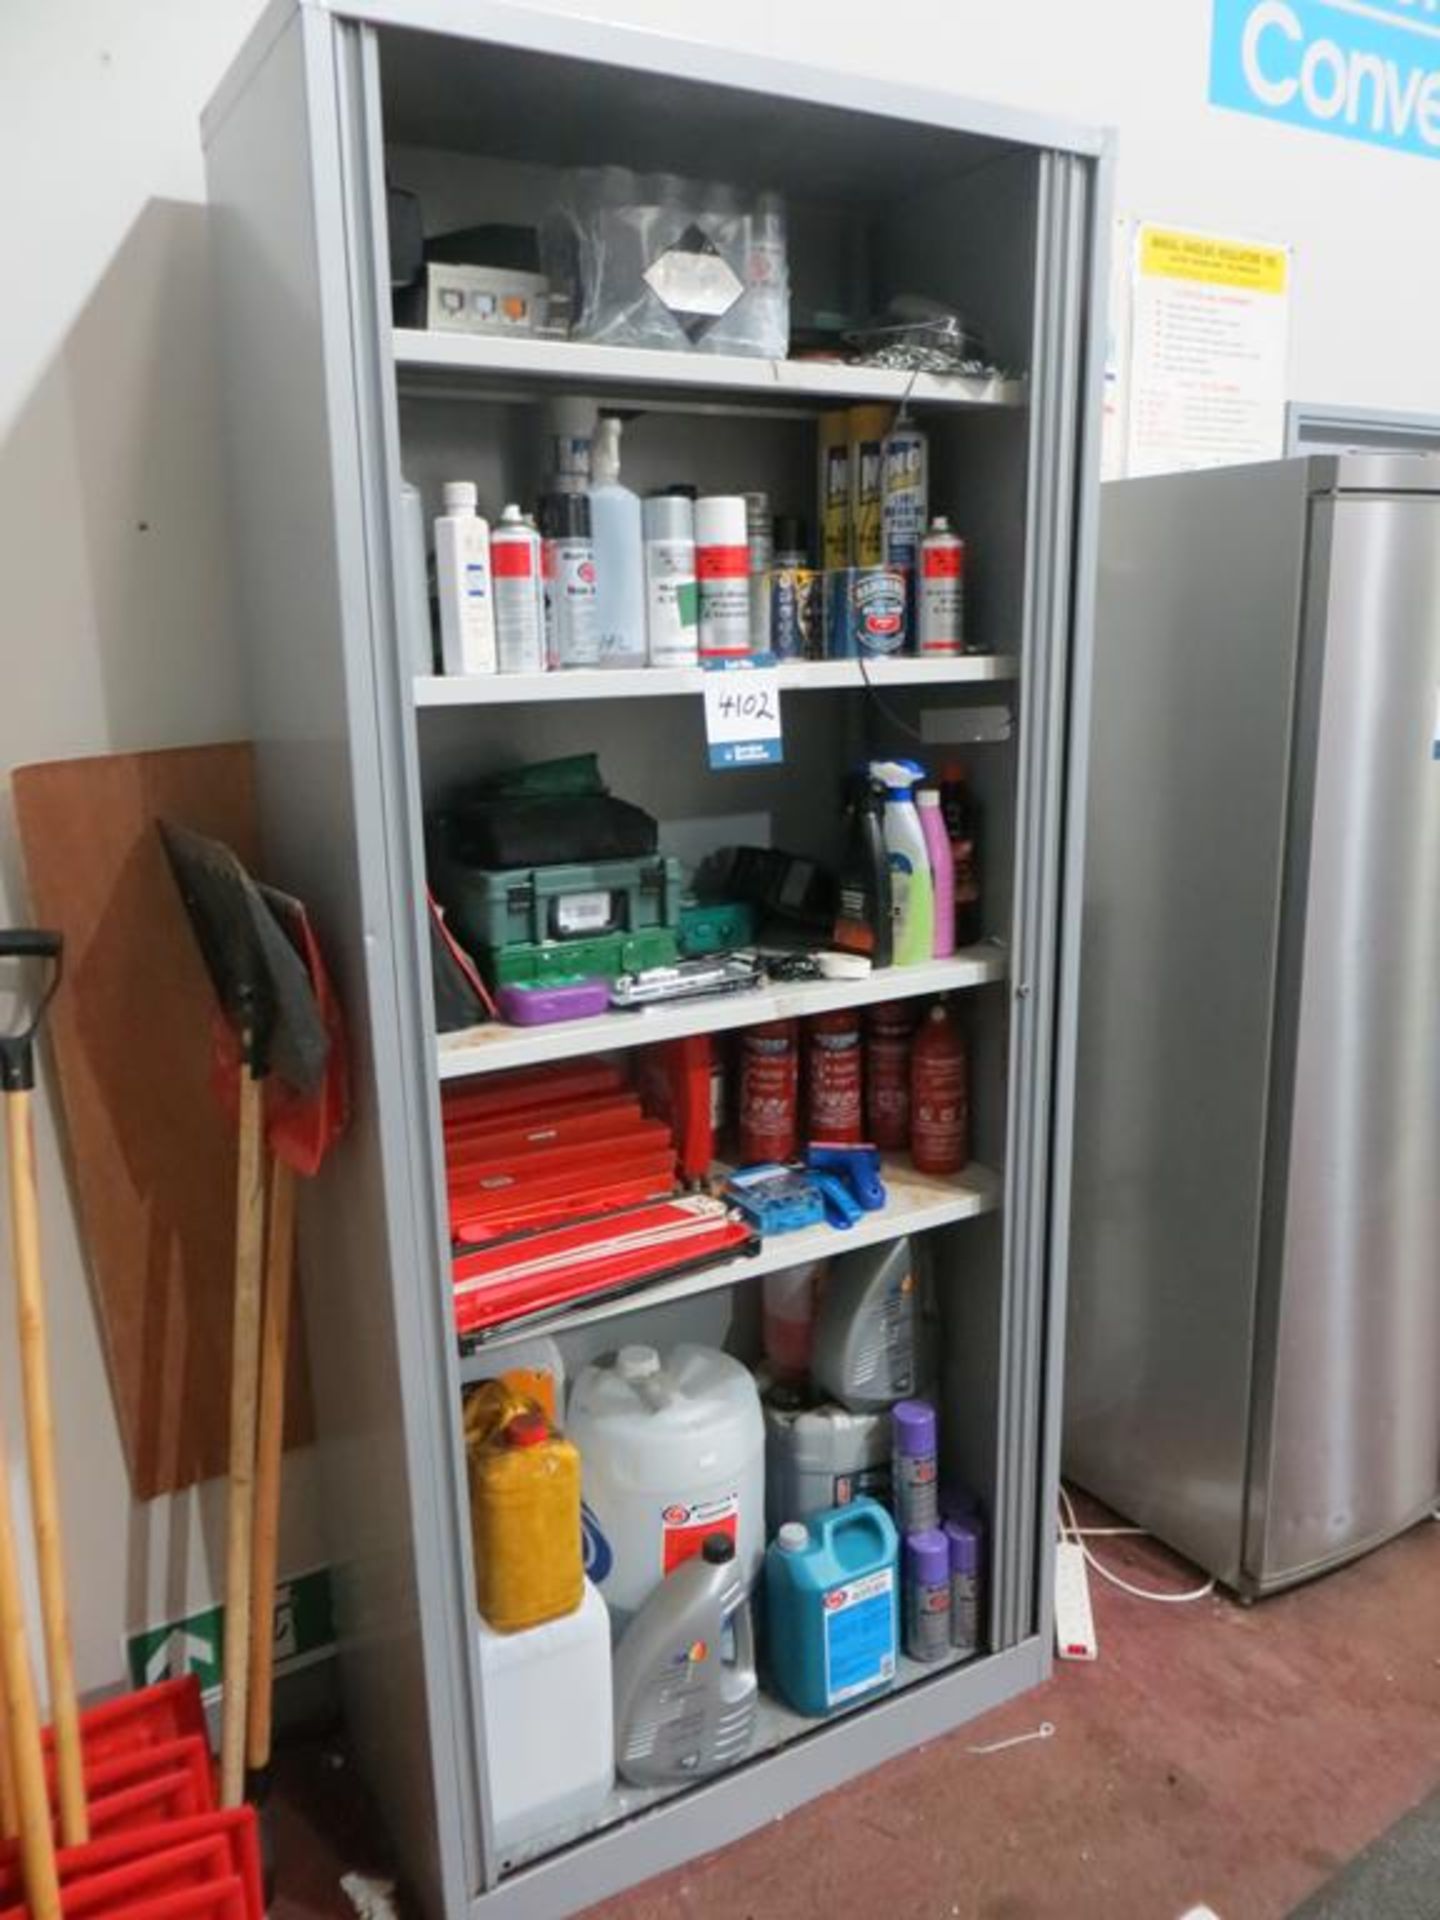 Tambour stationery cupboards containing quantity of aerosol paints, cleaners, dry powder fire